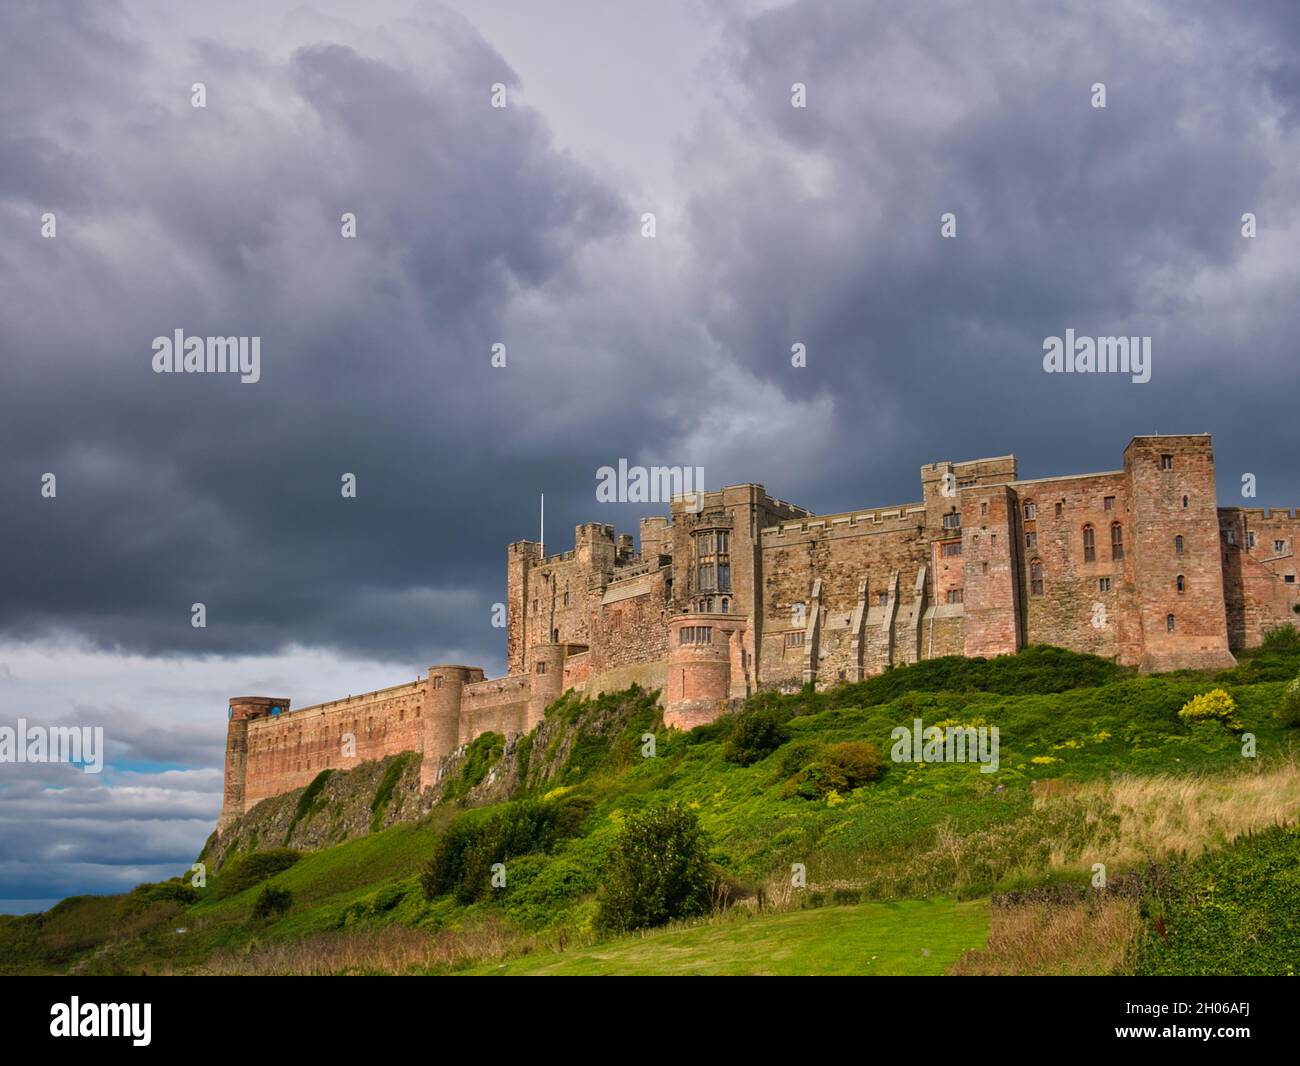 With sun shining through threatening clouds, the fortress-like south western face of the Grade 1 listed building, Bamburgh Castle in Northumberland,UK Stock Photo